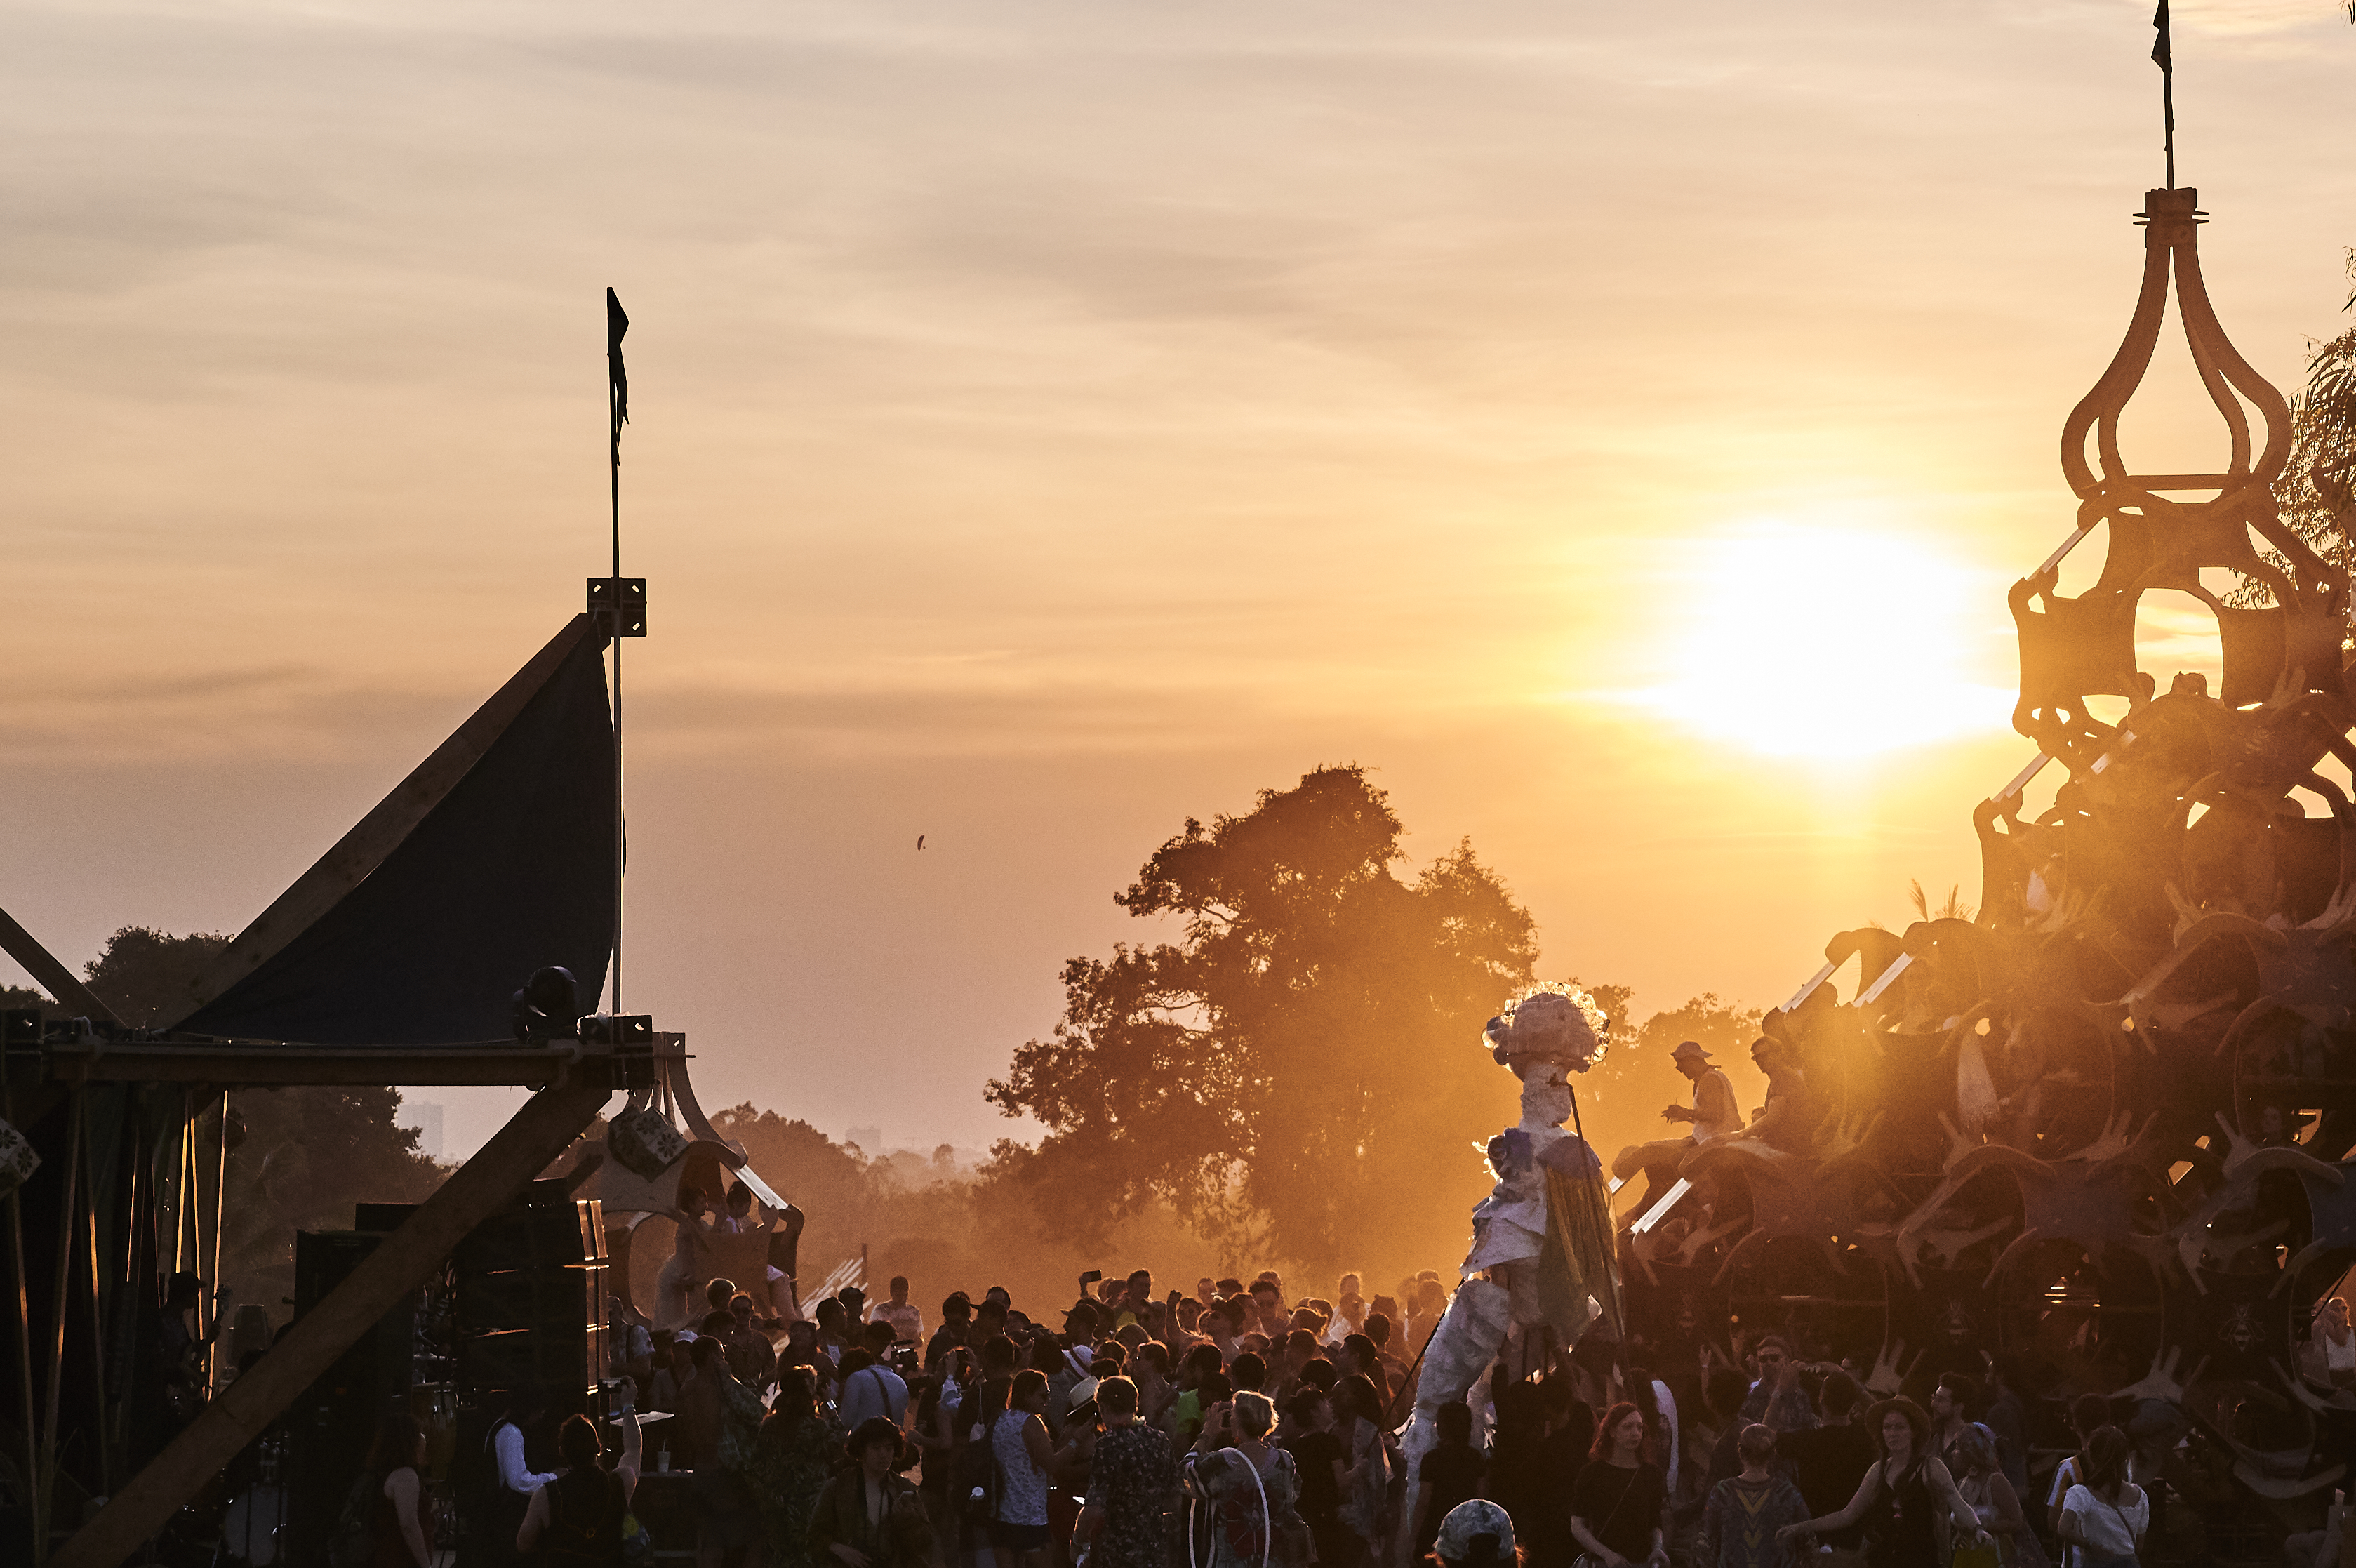 Guide to Wonderfruit | The Nitty Gritty Guide To Festivals